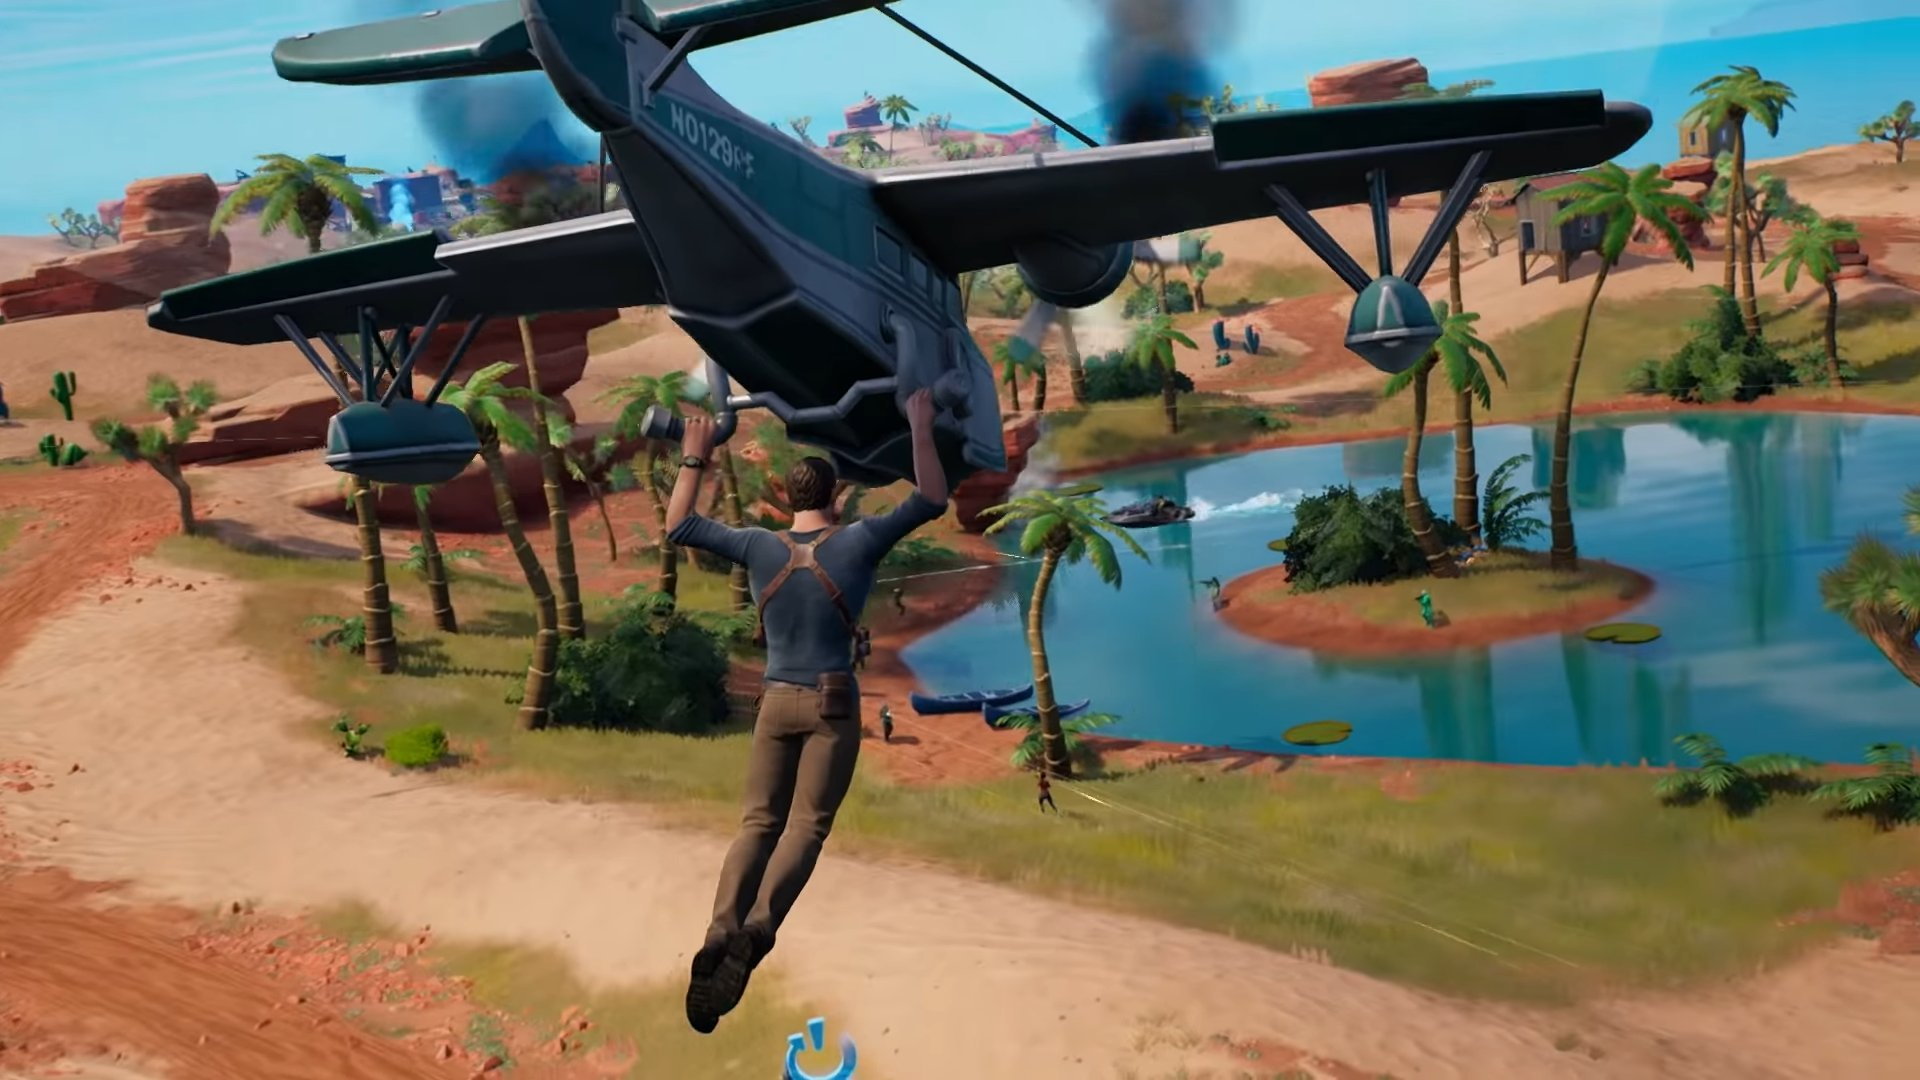 Find your Fortune on the Fortnite Island with Nathan Drake and